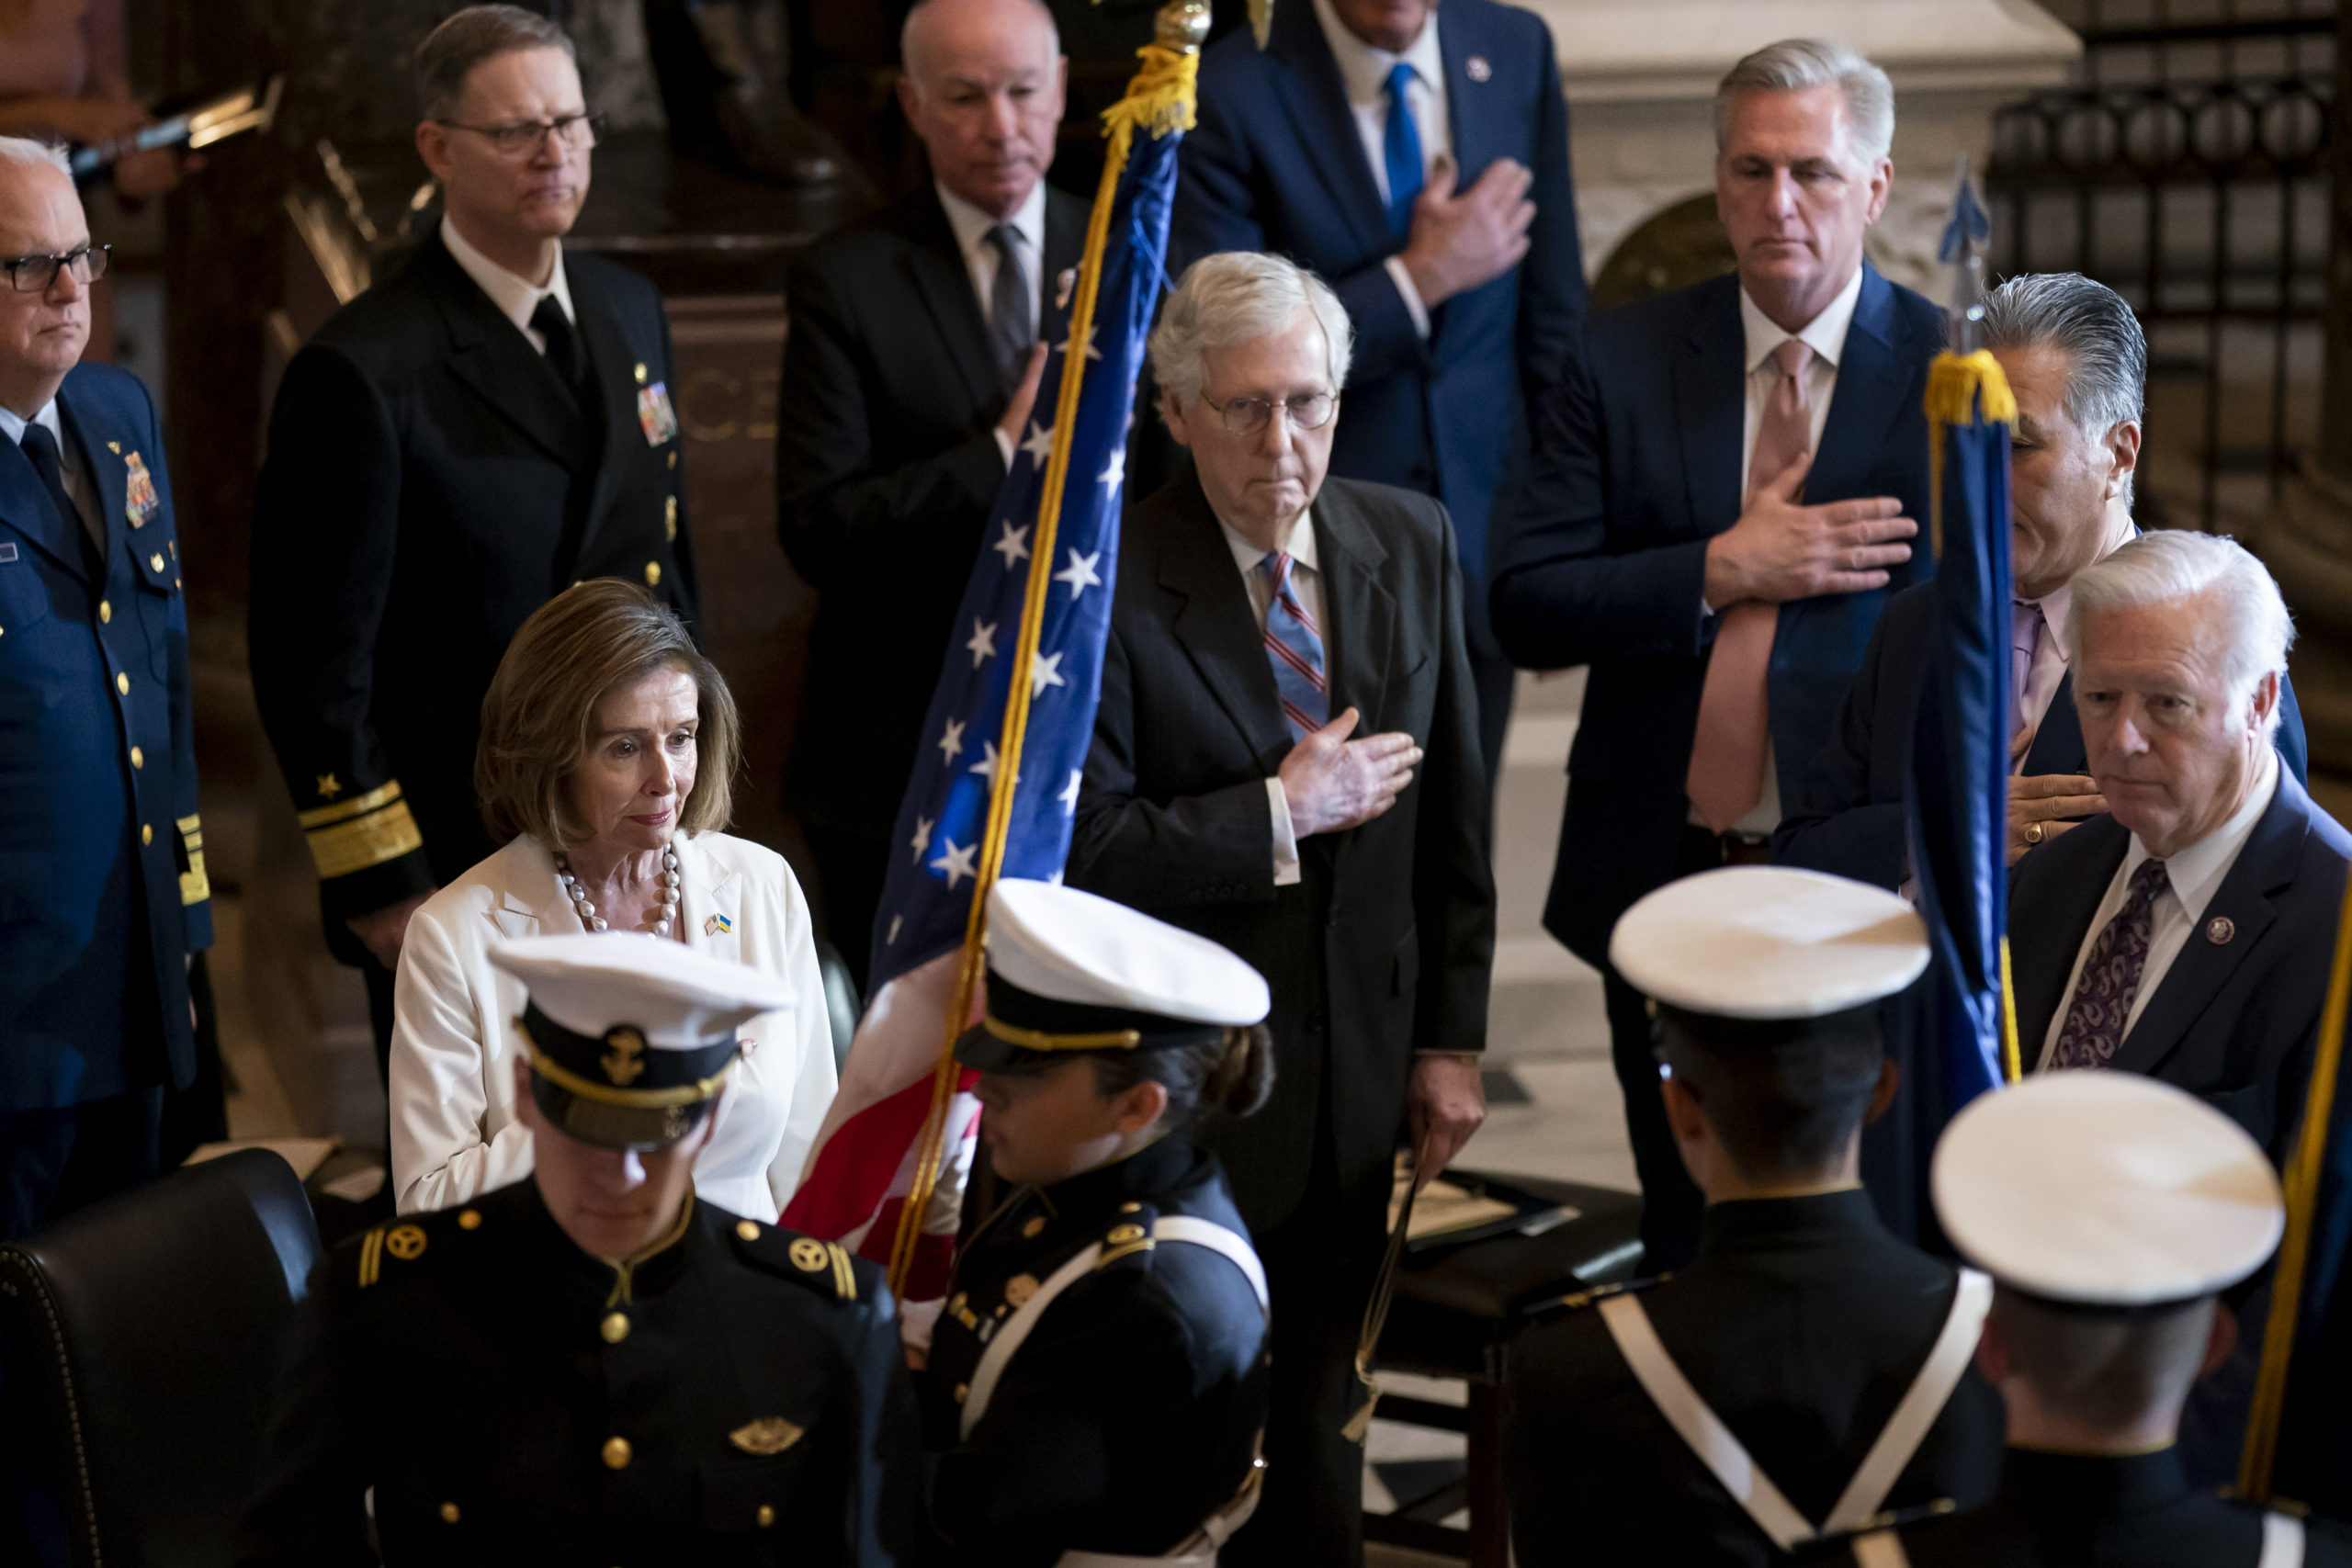 Democratic Speaker of the House Nancy Pelosi, Republican Senate Minority Leader Mitch McConnell and Republican House Minority Leader Kevin McCarthy attend a Congressional Gold Medal ceremony to honor members of the Merchant Marine who served in World War II, at the Capitol in Washington, D. C., on Wednesday.